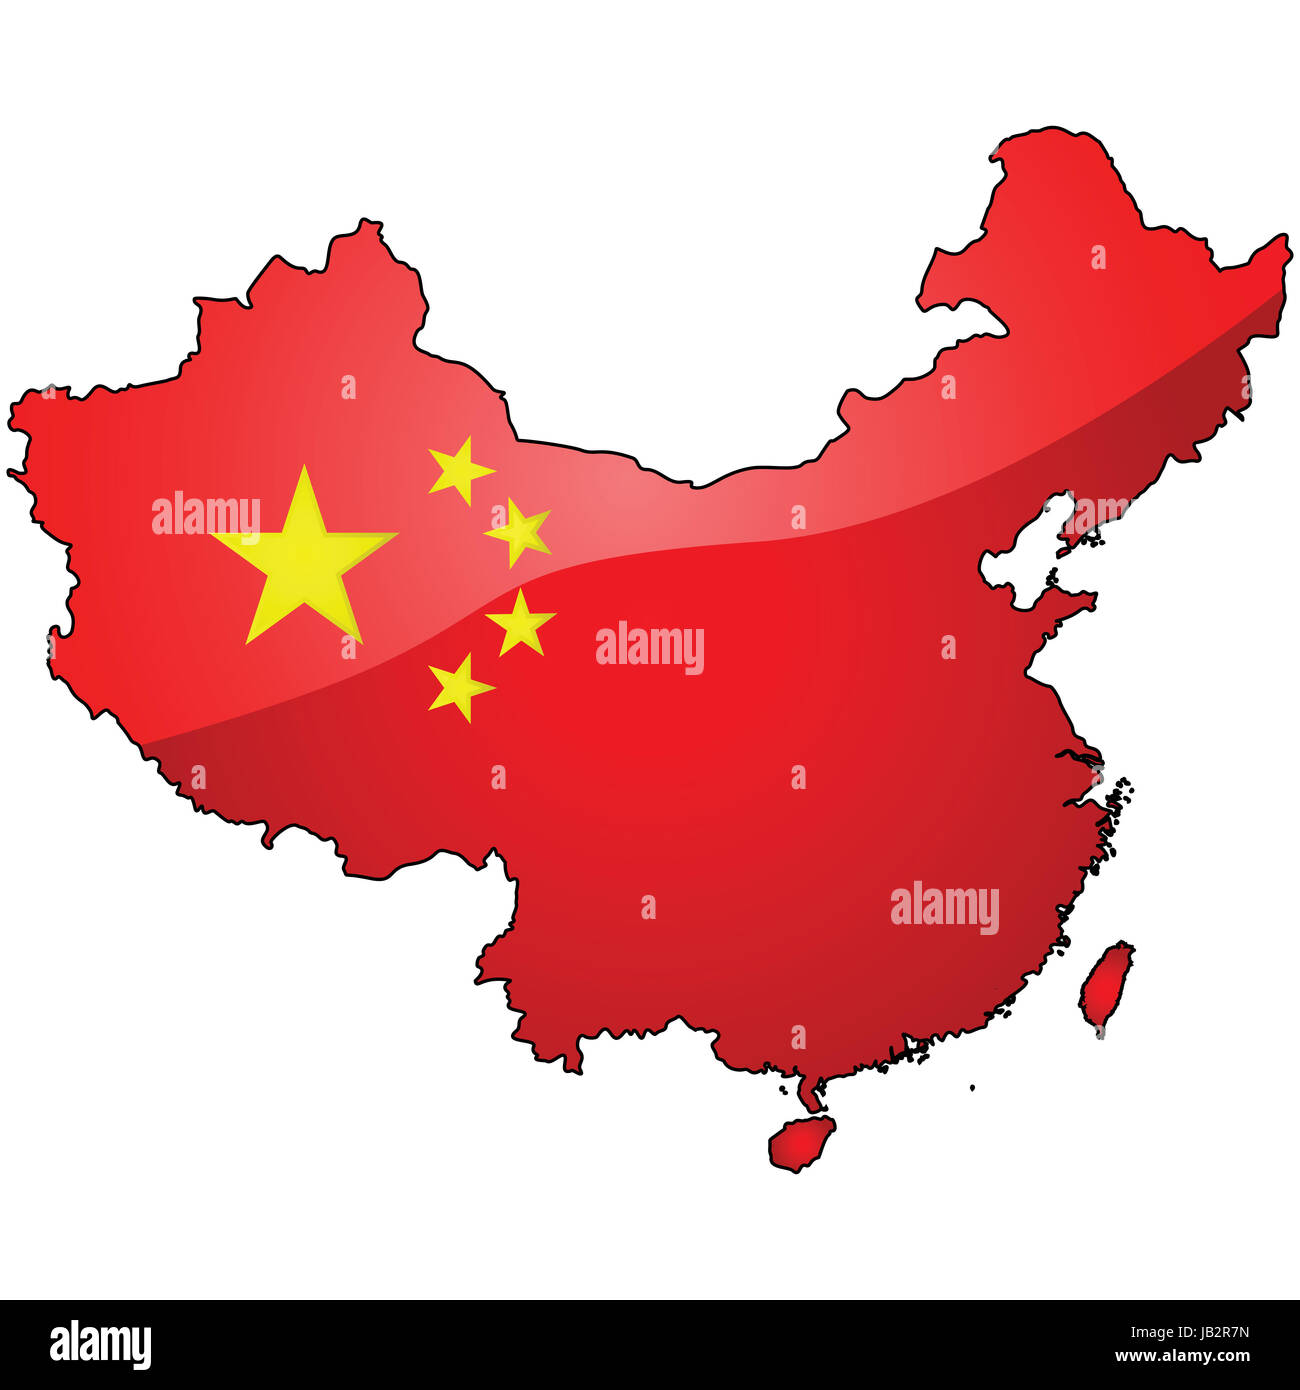 Glossy illustration showing the flag of China over the country's map Stock Photo